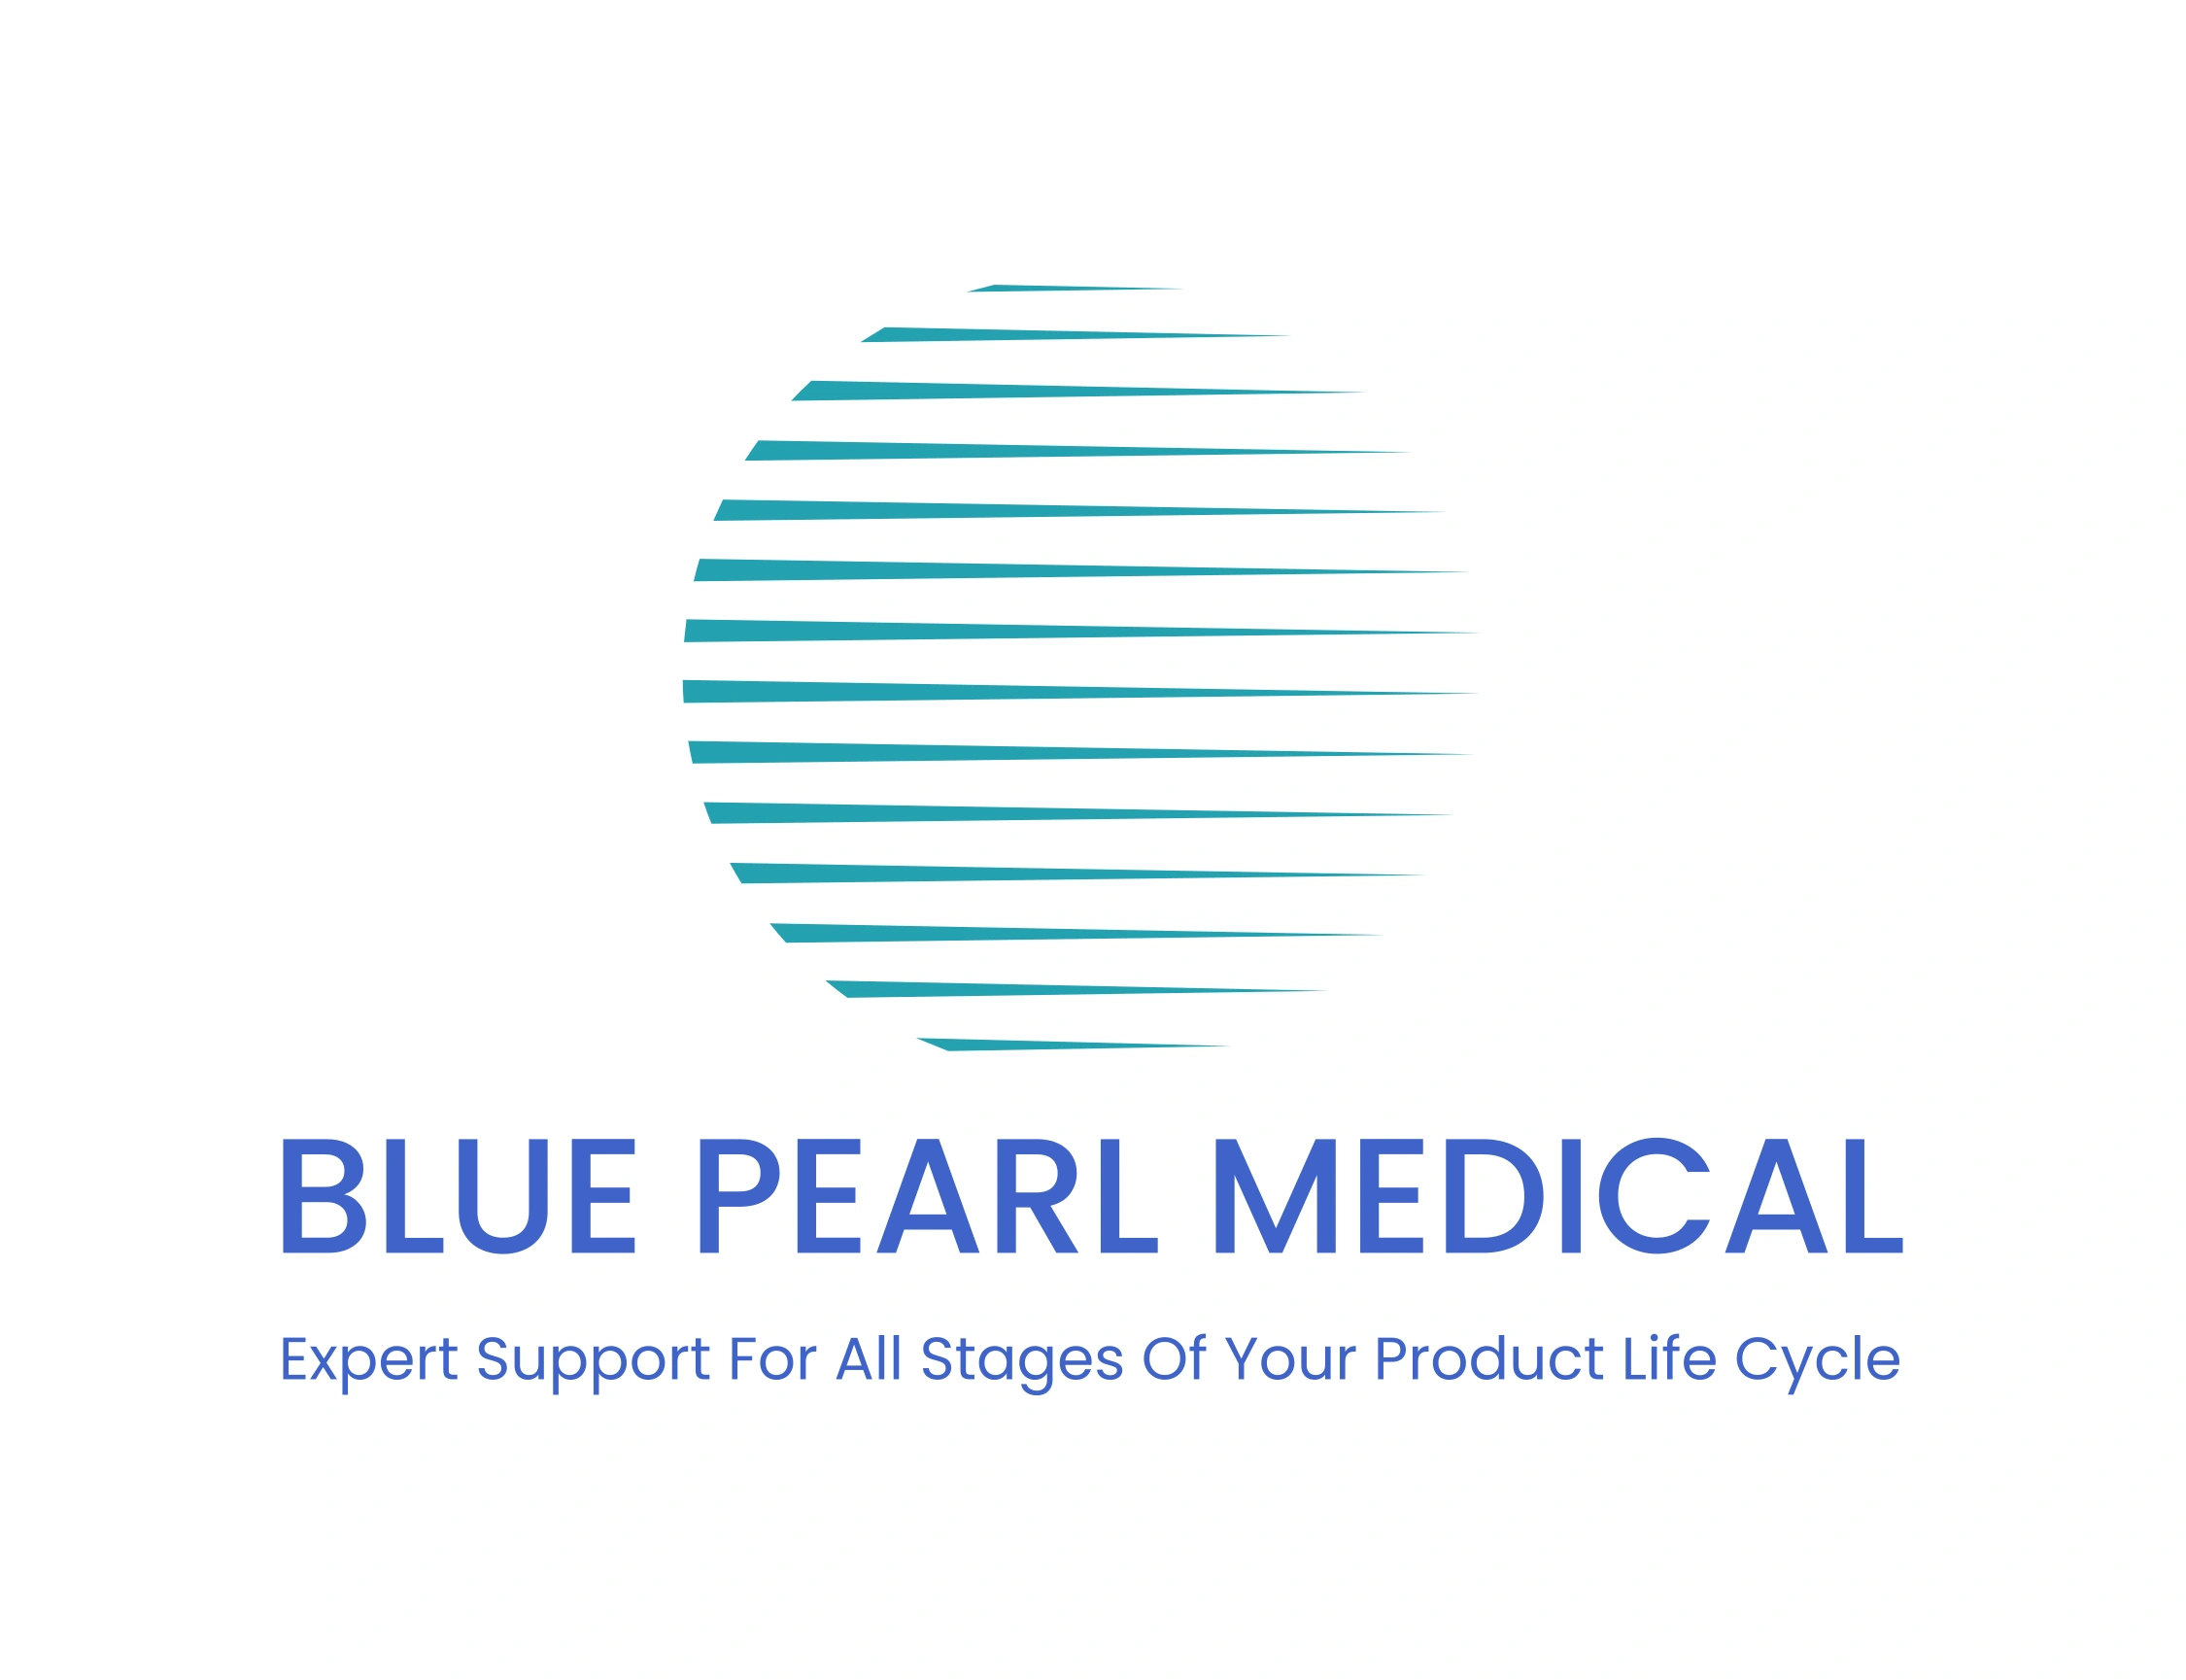 Blue Pearl Medical - Medical Device Project and Program Management,  Consulting, Expert Support for All Stages of the Medical Device Product  Life Cycle, Medical Device Project and Program Management